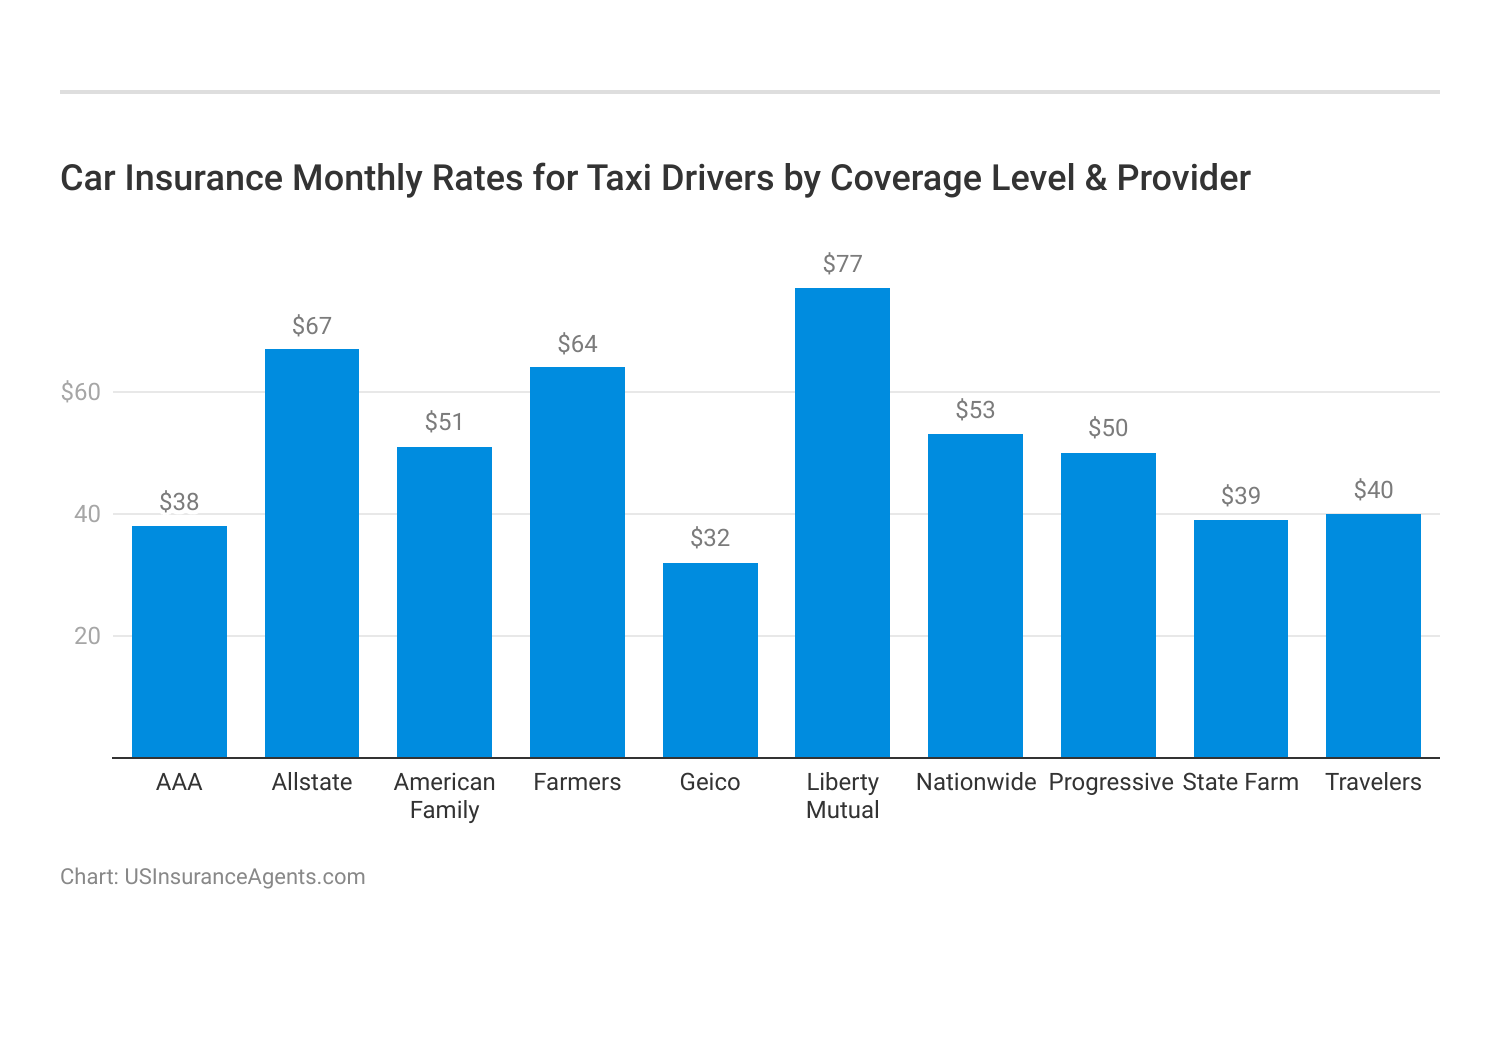 <h3>Car Insurance Monthly Rates for Taxi Drivers by Coverage Level & Provider</h3>